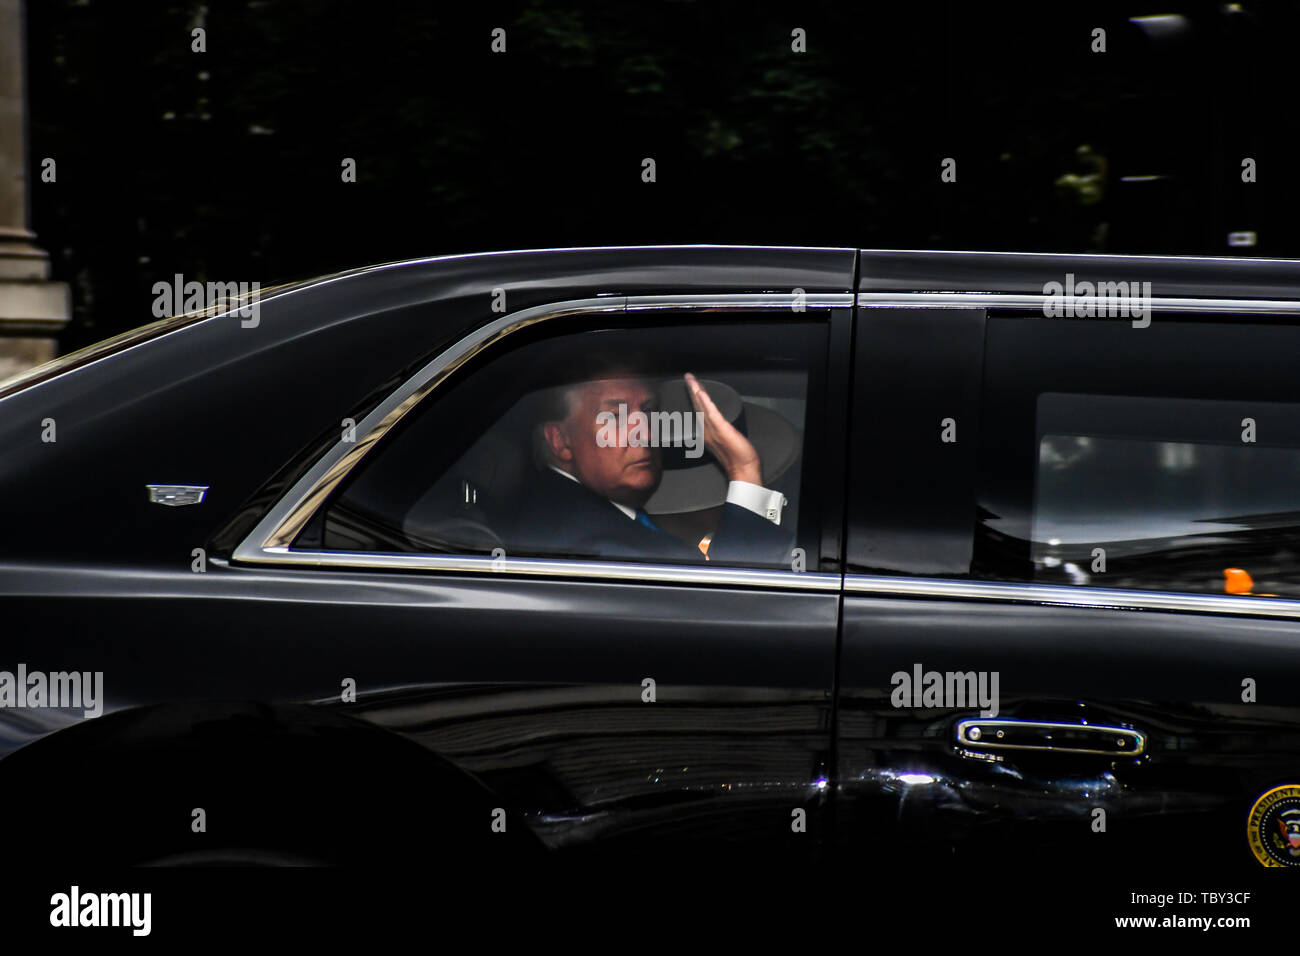 London, Britain. 3rd June, 2019. U.S. President Donald Trump is seen in a car during his visit in London, Britain, on June 3, 2019. U.S. President Donald Trump arrived in London on Monday to start his three-day state visit to Britain as widespread protests against him are set to take place. Credit: Alberto Pezzali/Xinhua/Alamy Live News Stock Photo